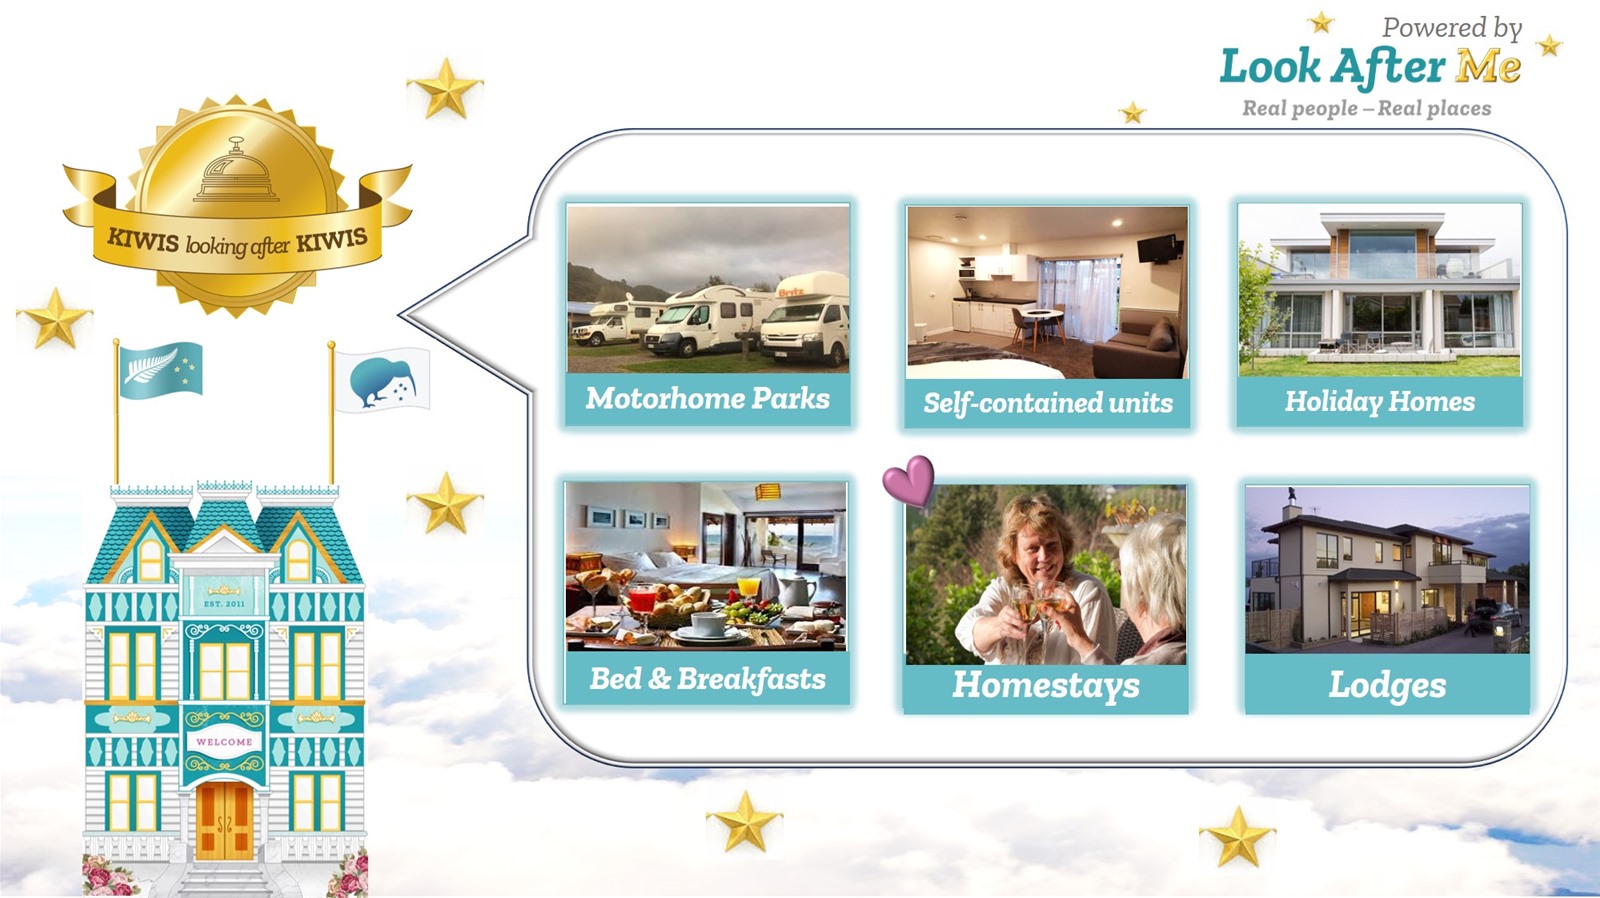 Virtual hotel has holiday houses, homestays, farmstays, self-contained units for accommodation in new zealand